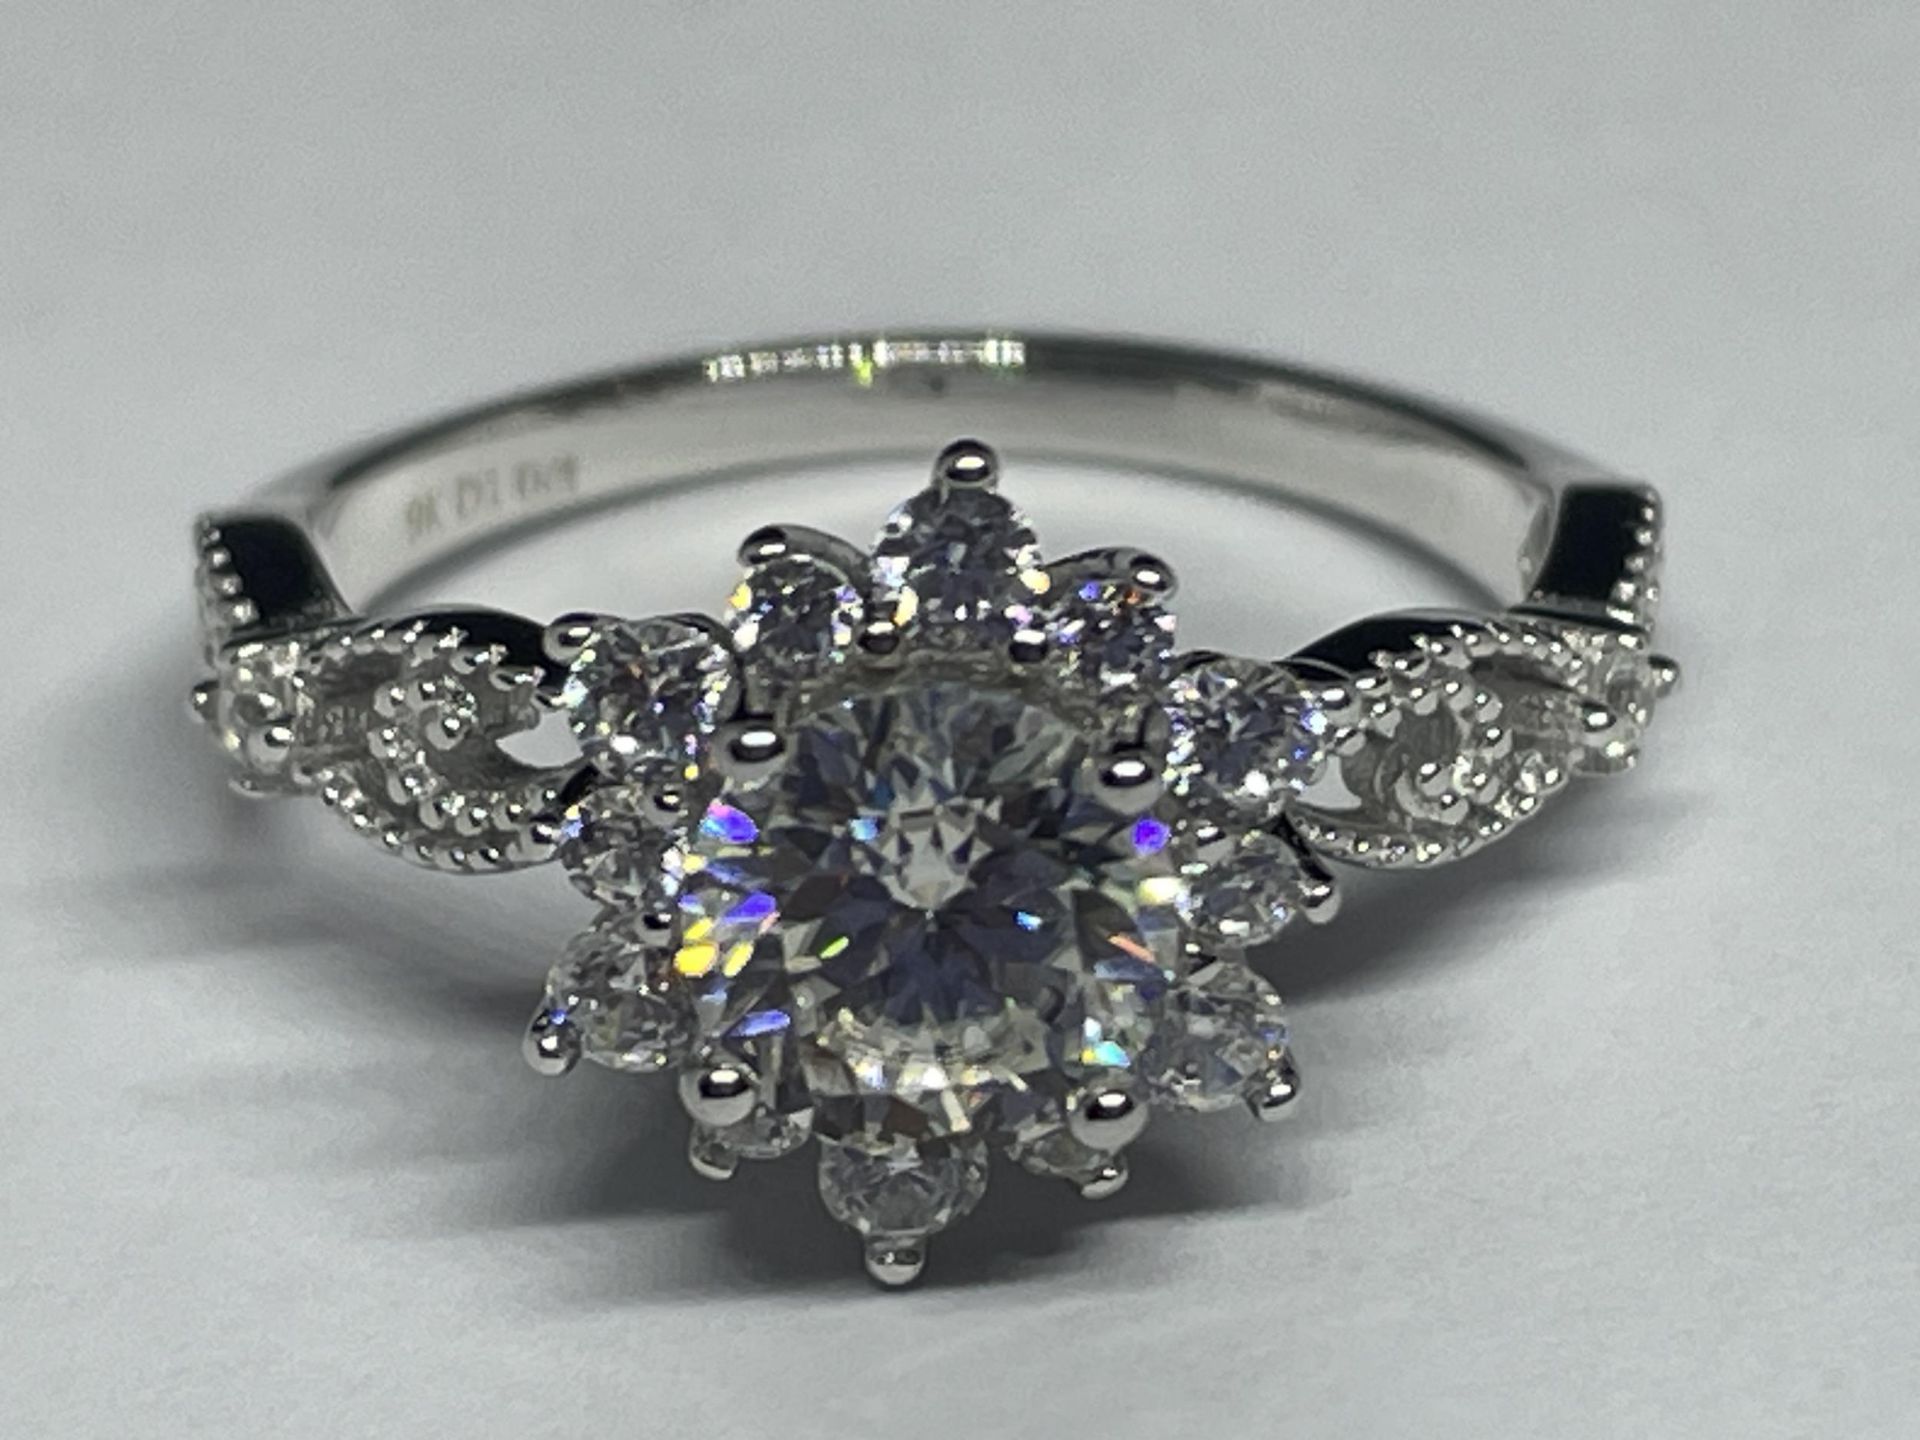 A MARKED 9K RING SET WITH A 1 CARAT OF MOISSANITE AS A FLOWER DESIGN AND CHIPS TO SHOULDERS SIZE P/Q